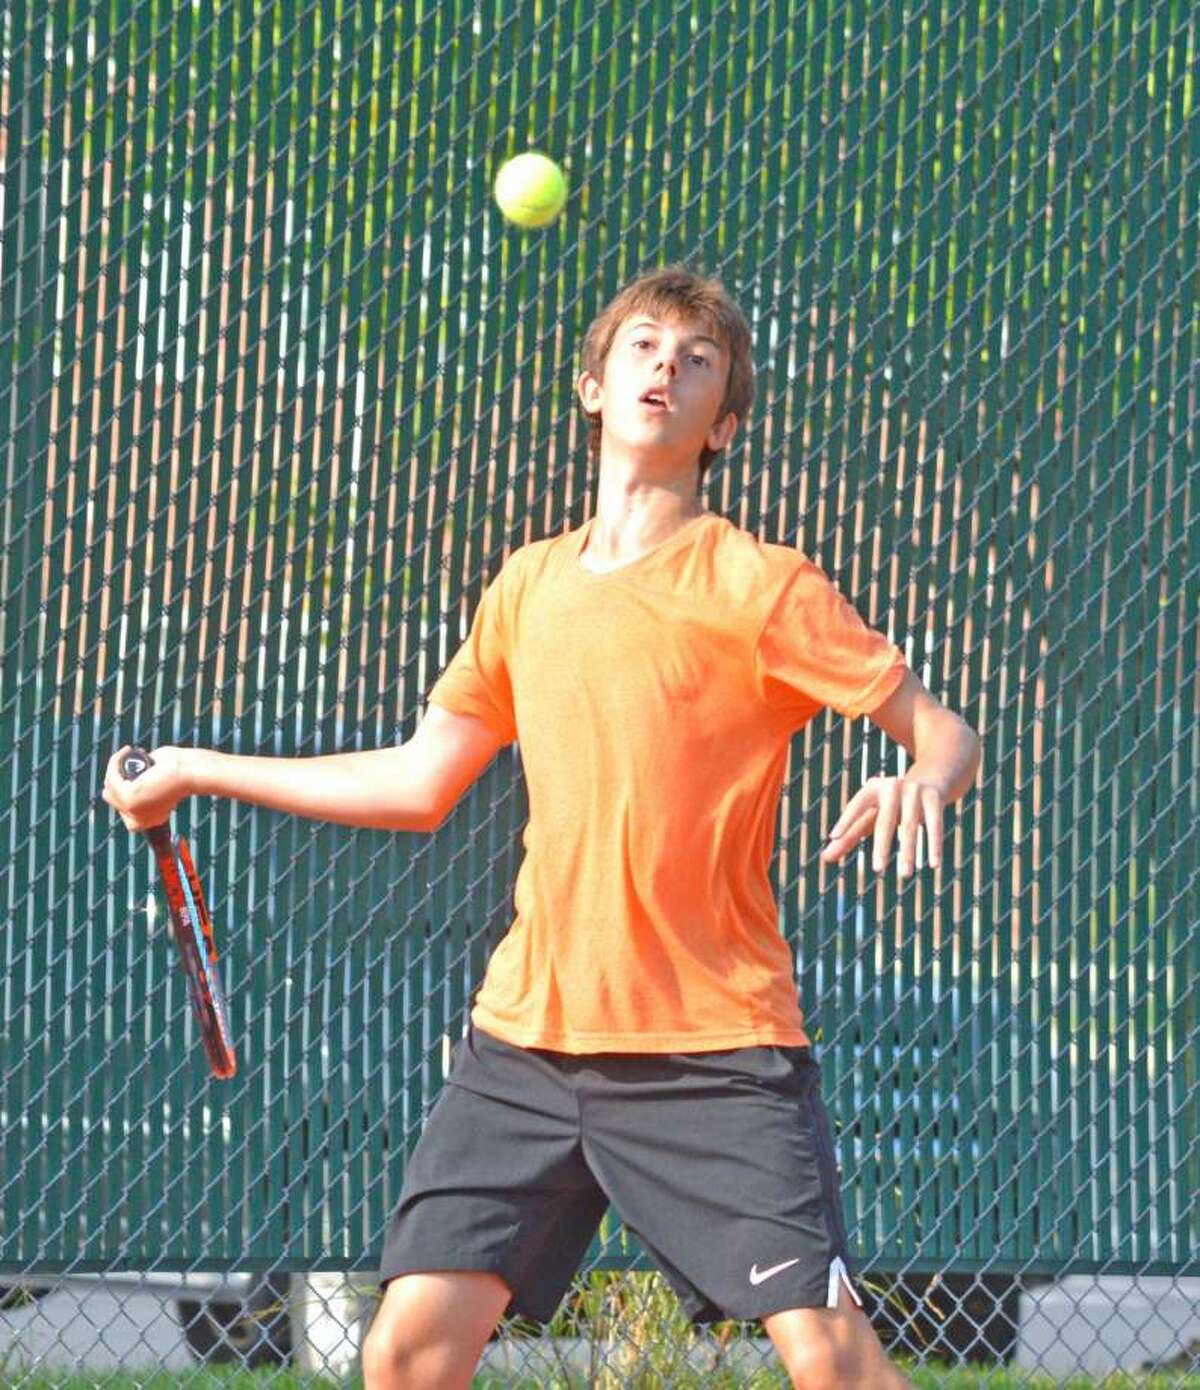 Drake Schreiber, who will be a senior at Edwardsville, makes a forehand return during last year’s Pro Wild Card Challenge at the EHS Tennis Center.